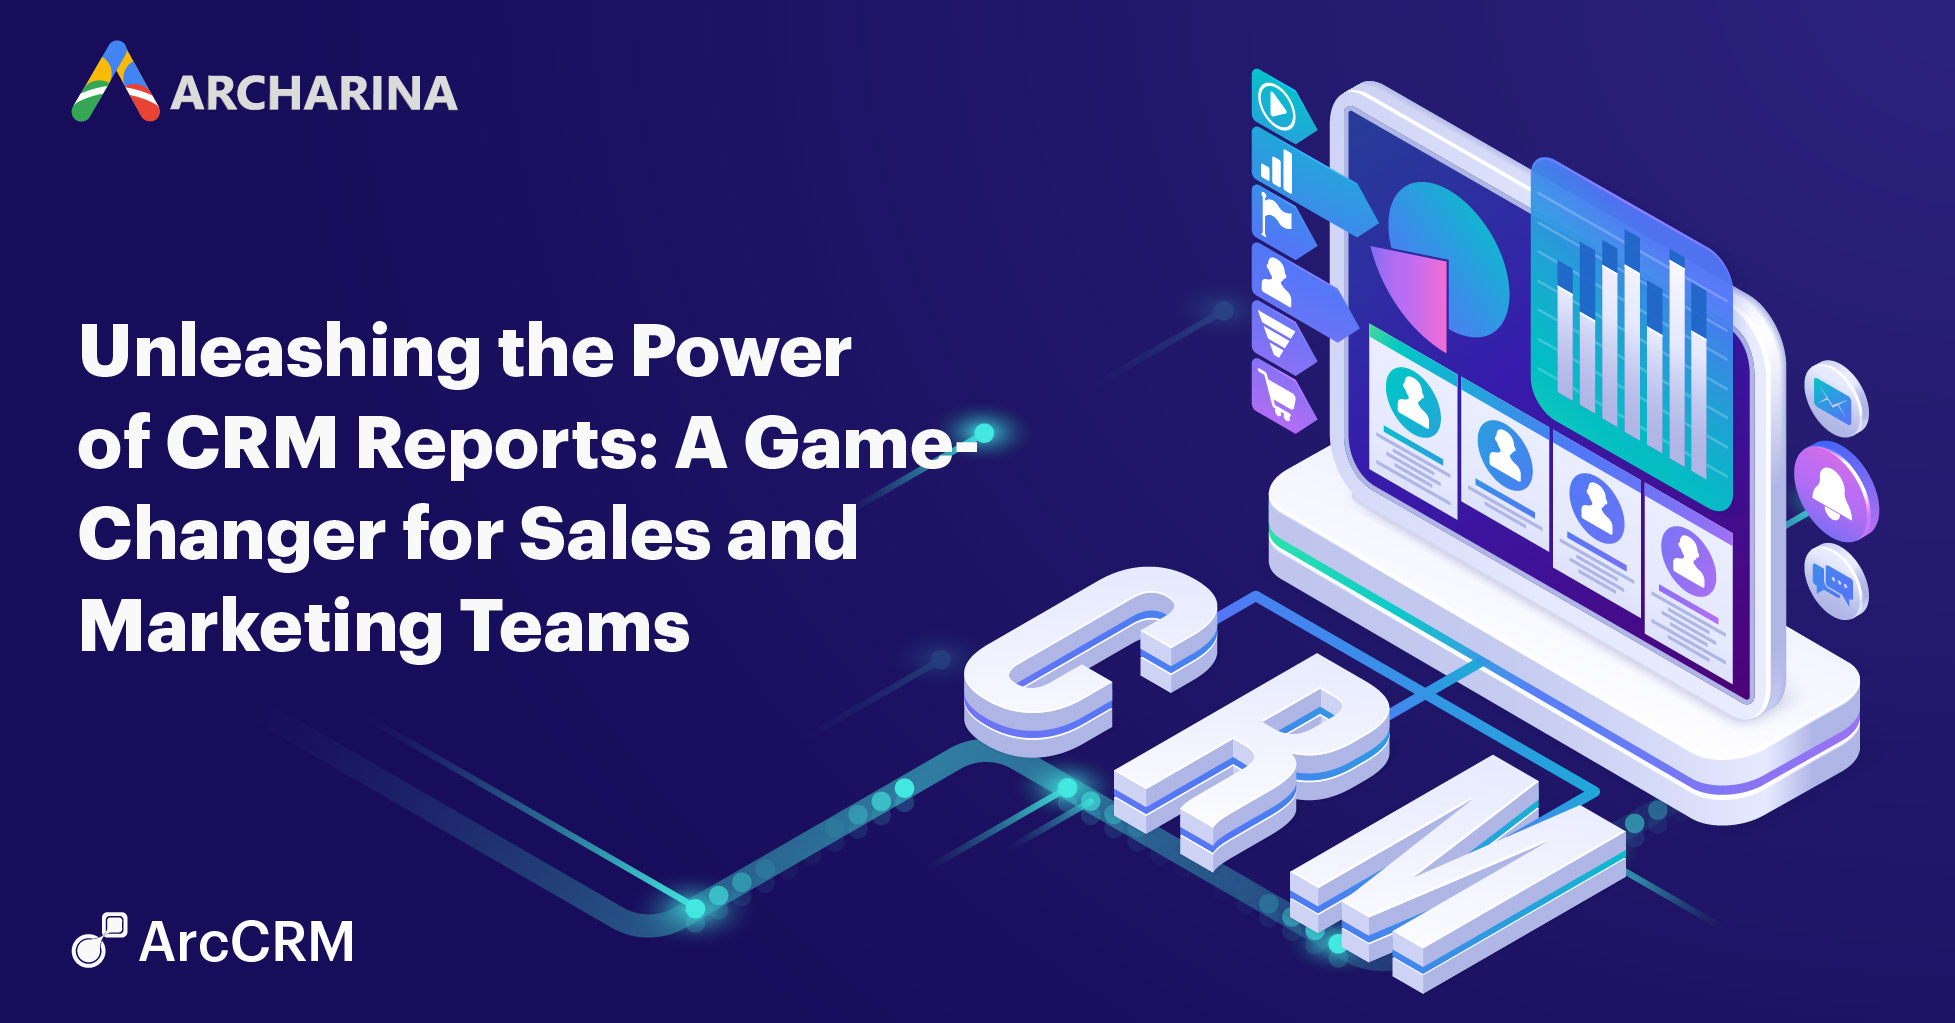 Unleashing the Power of CRM Reports: A Game-Changer for Sales and Marketing Teams